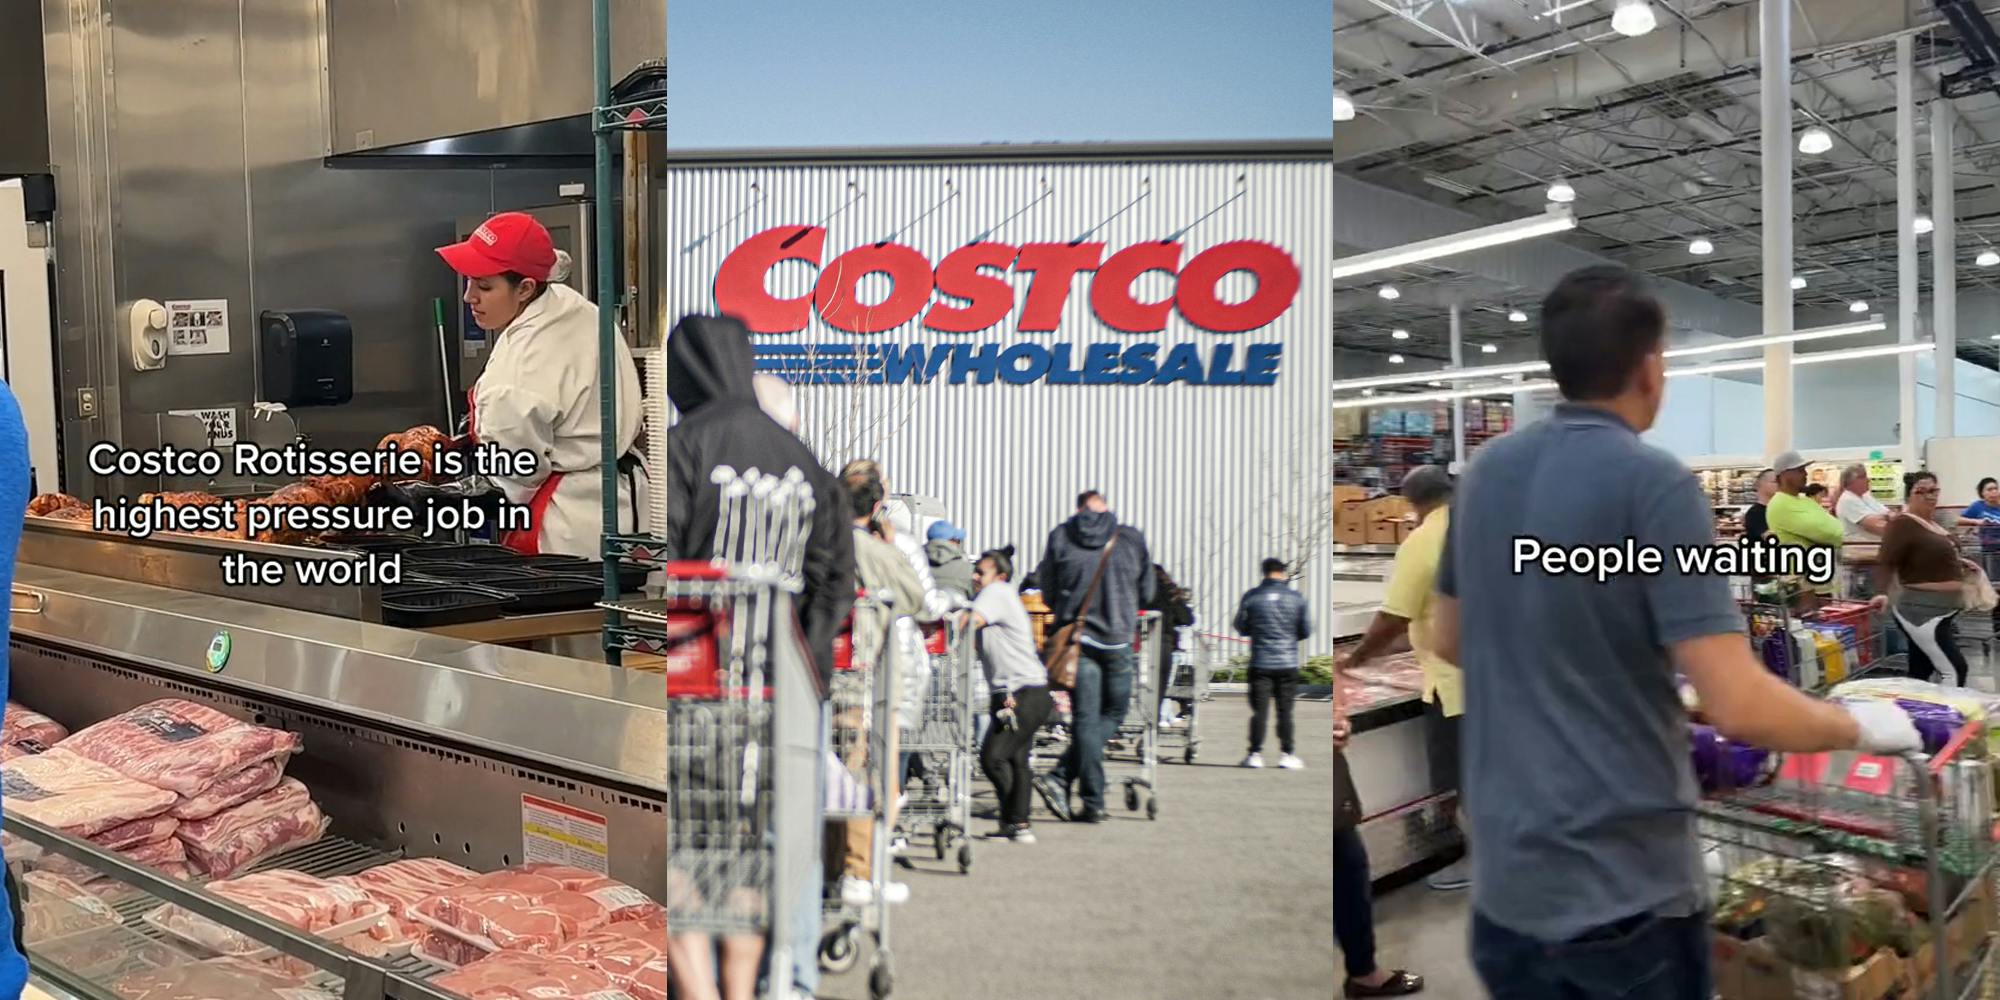 Costco Rotisserie worker with caption "Costco Rotisserie is the highest pressure job in the world" (l) Costco building with sign and customers lined up (c) Costco interior with customers with caption "People waiting" (r)